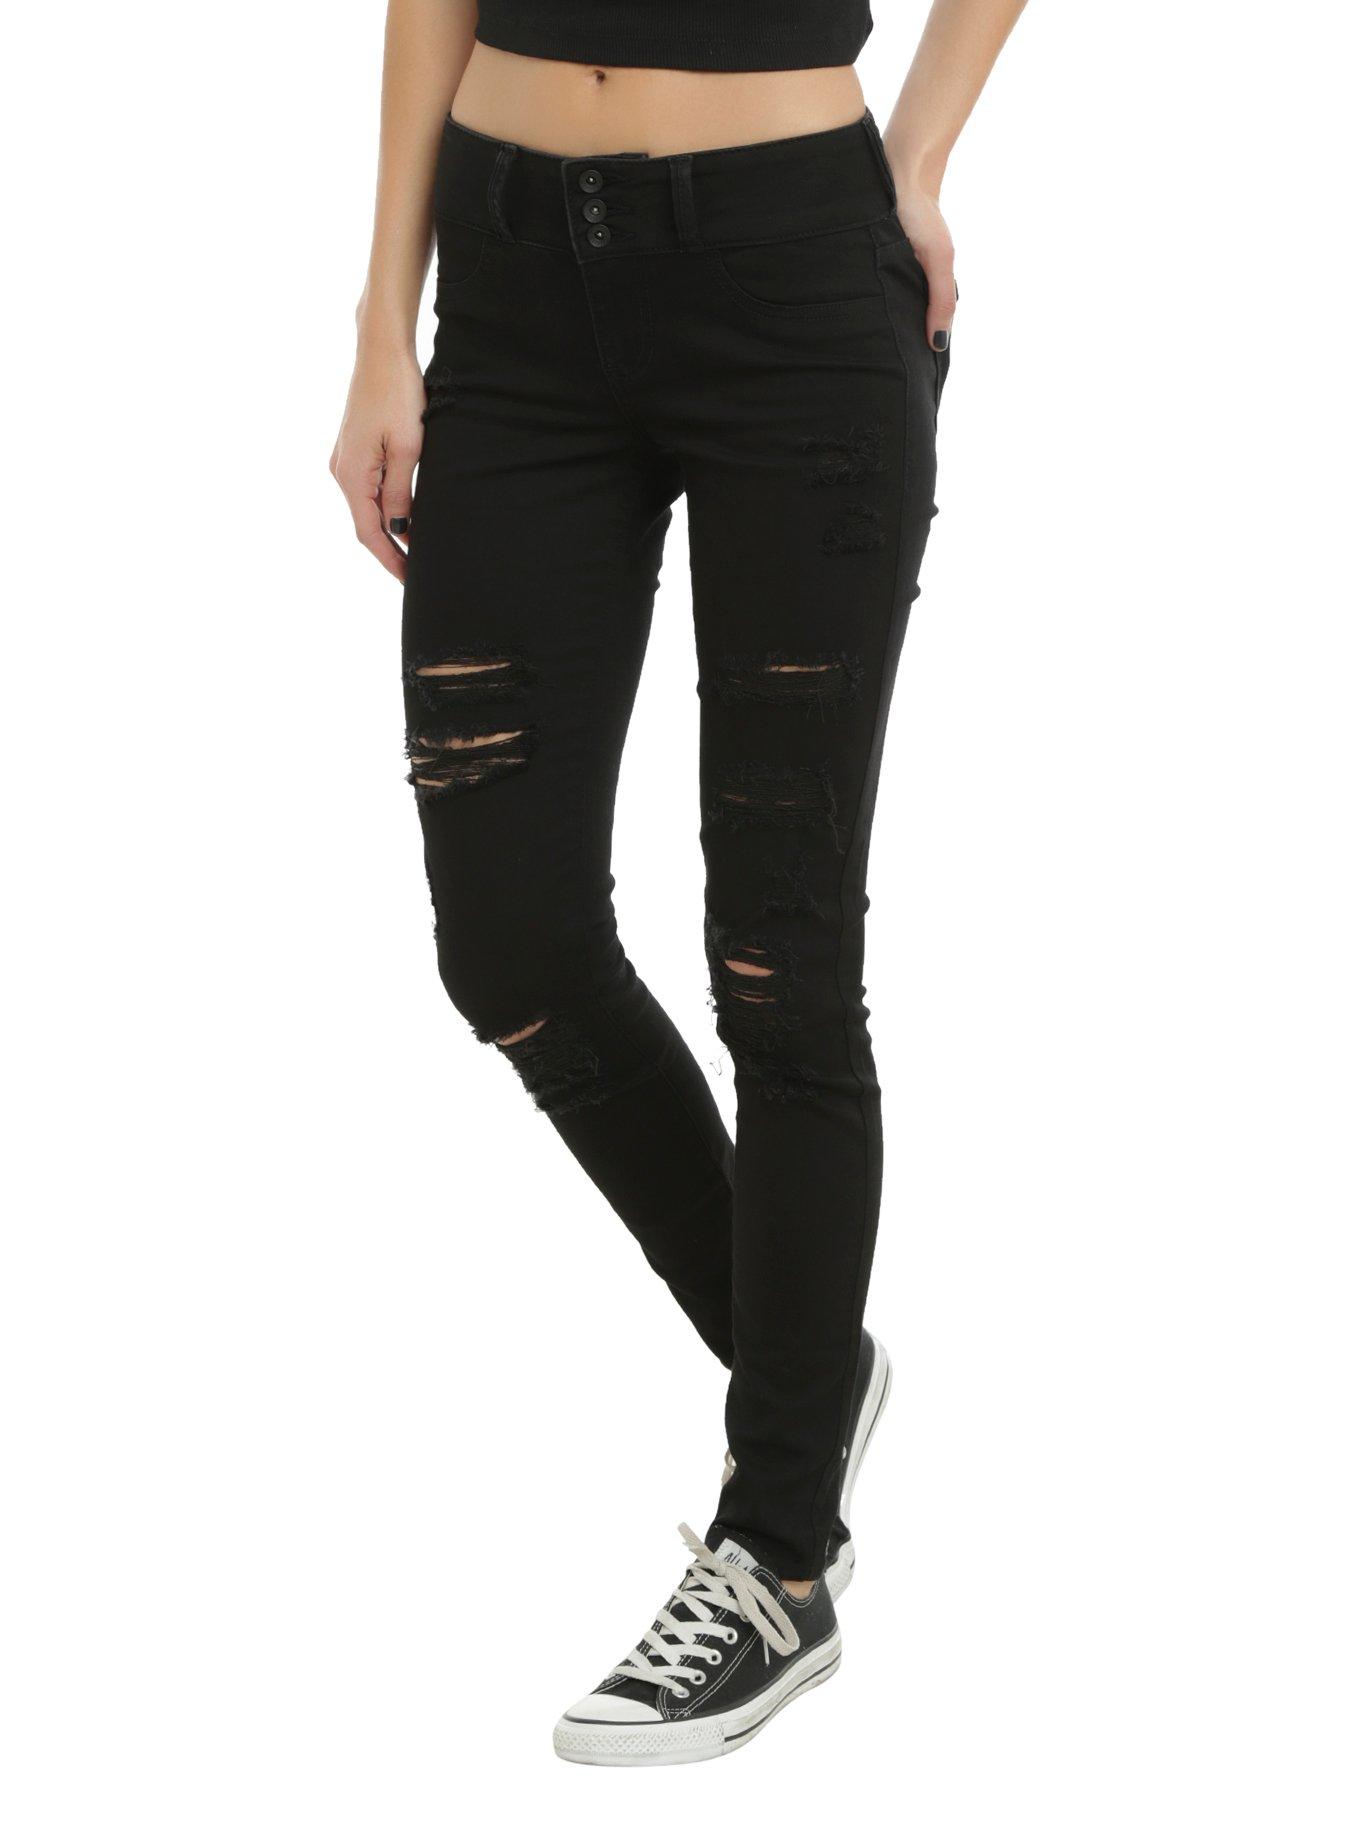 Blue Topic Red Ripped Skinny Jeans - Juniors